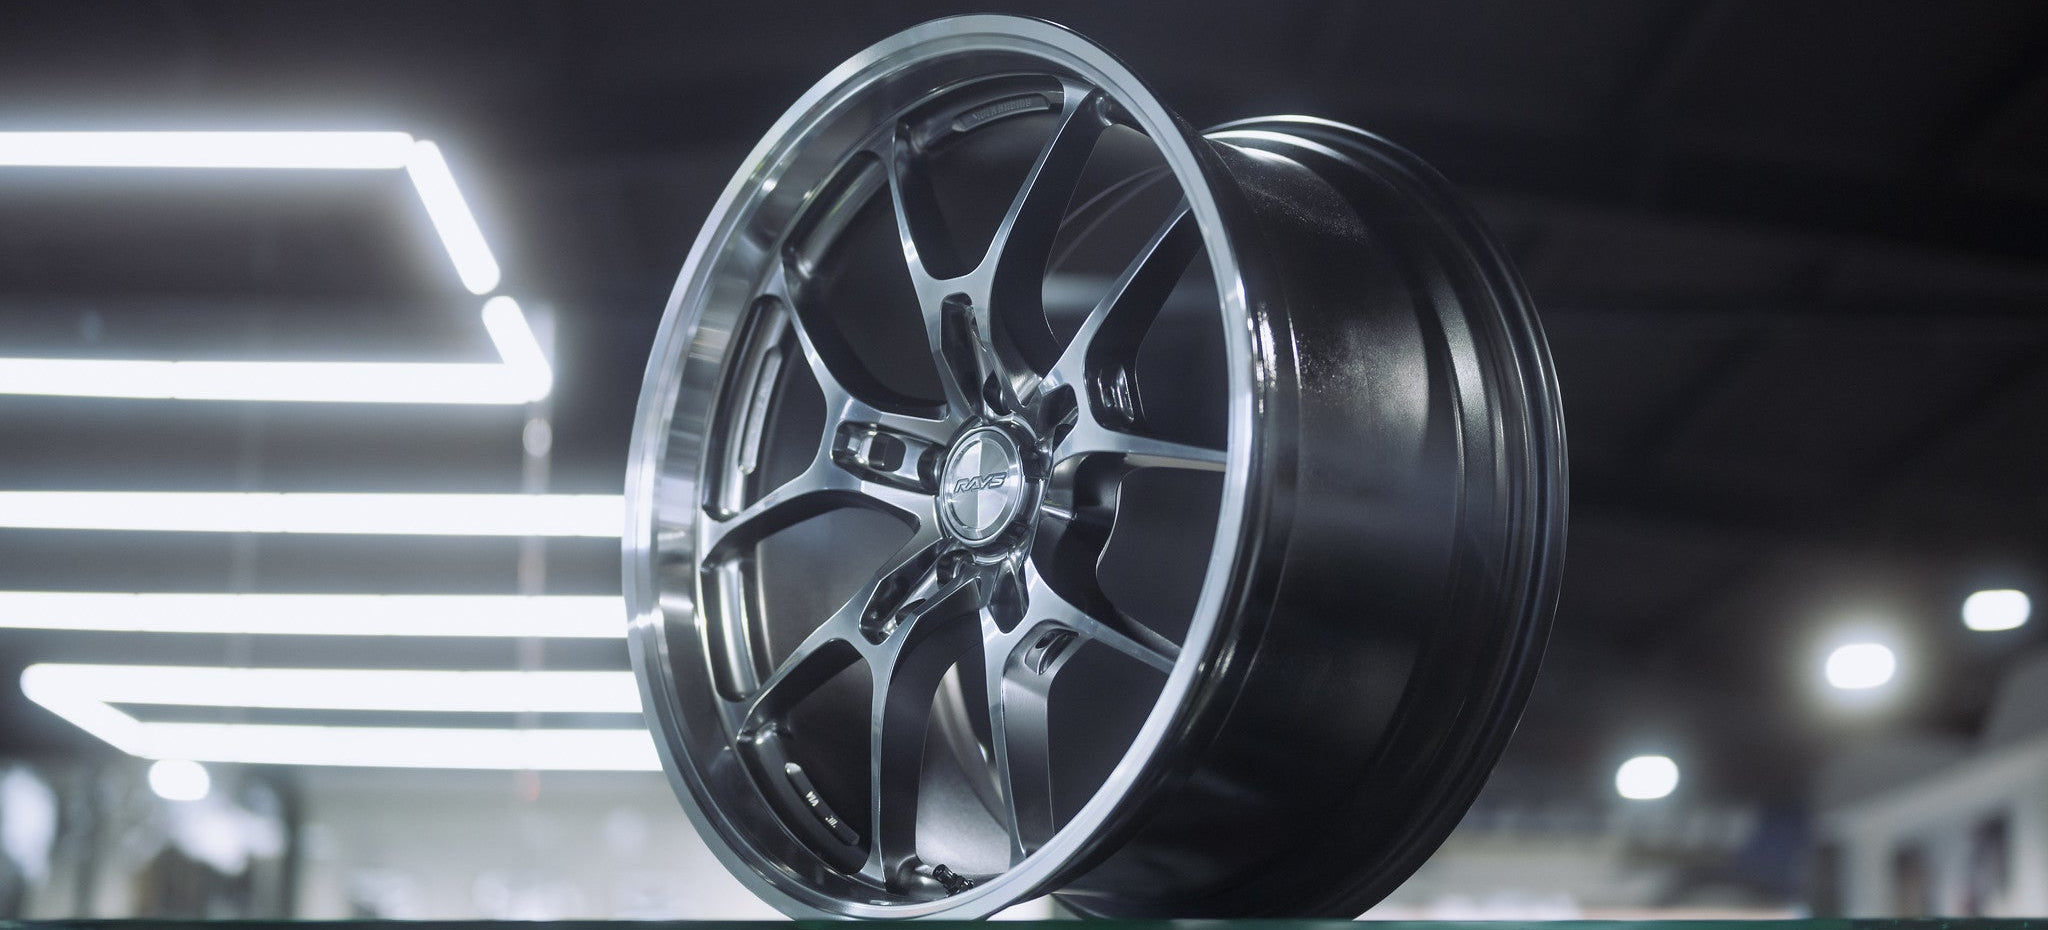 Volk Racing G025LC - Premium Wheels from Volk Racing - From just $5990! Shop now at MK MOTORSPORTS